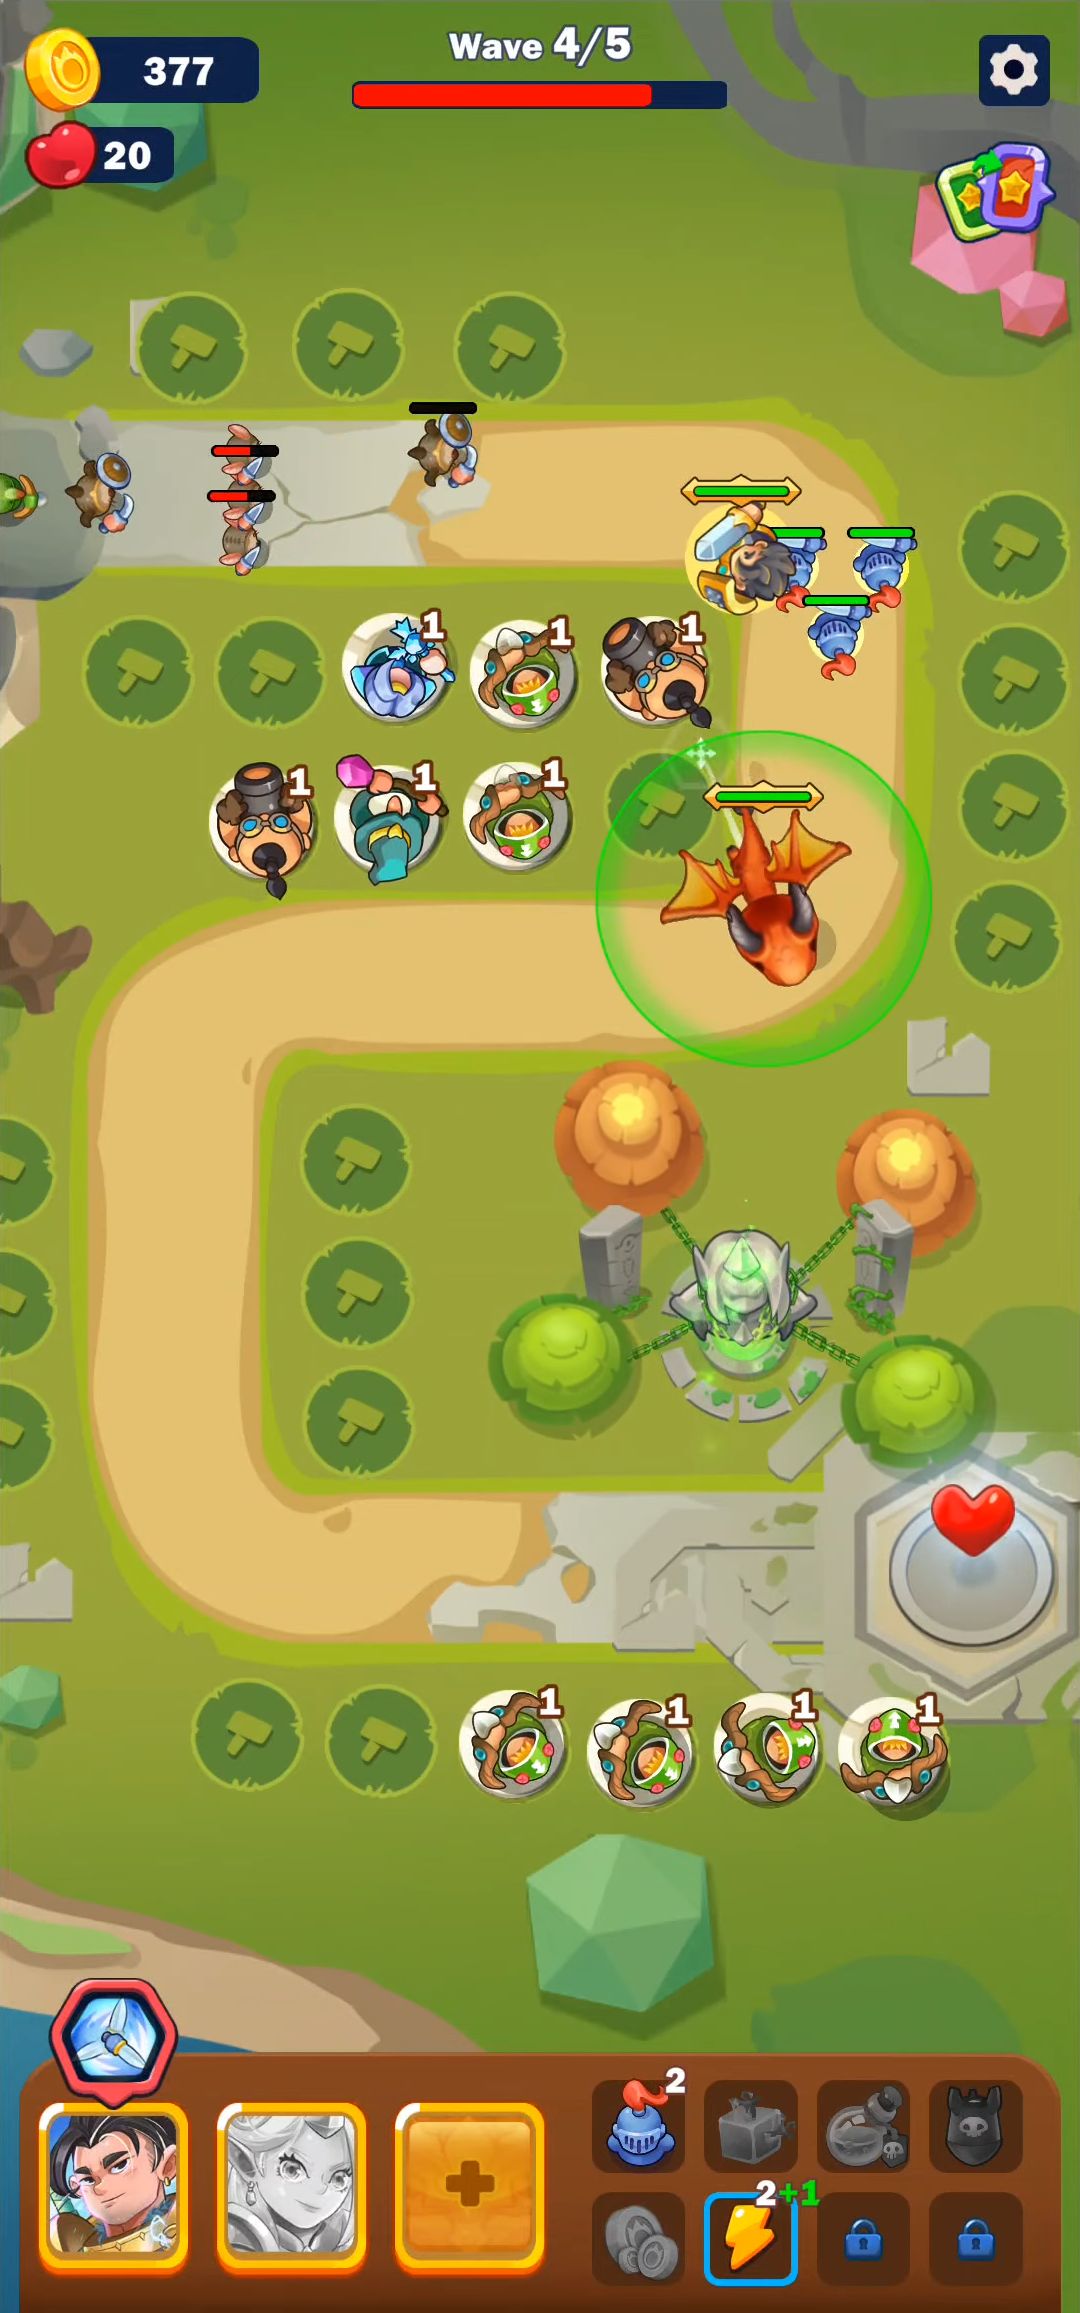 Gameplay of the Raid Royal: Tower Defense for Android phone or tablet.